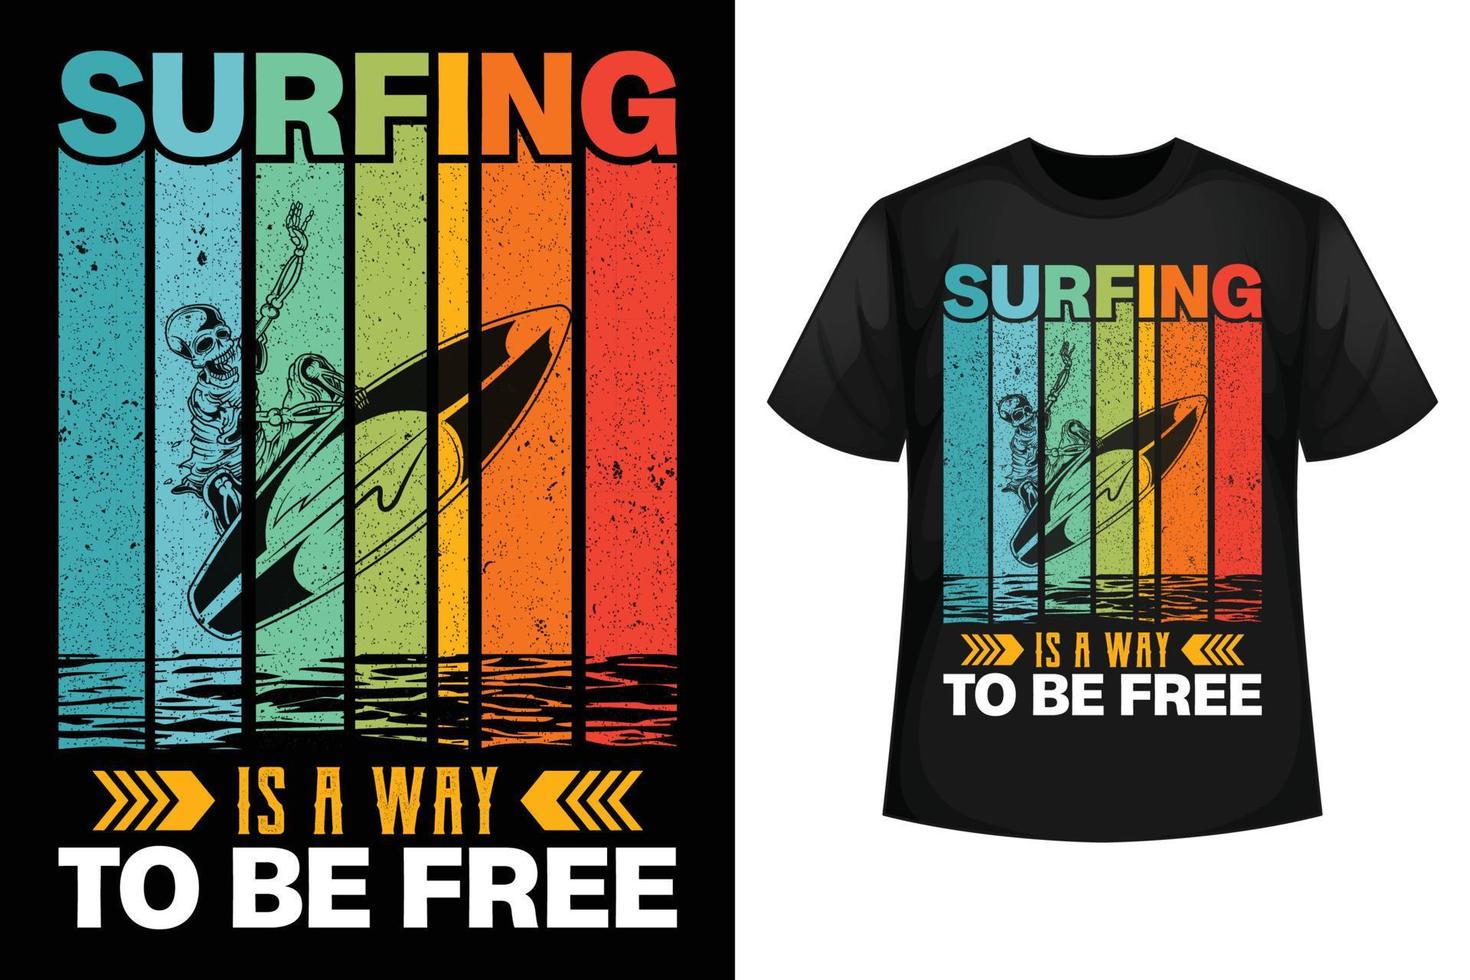 Surfing is a way to be free - Surfing t-shirt design template vector